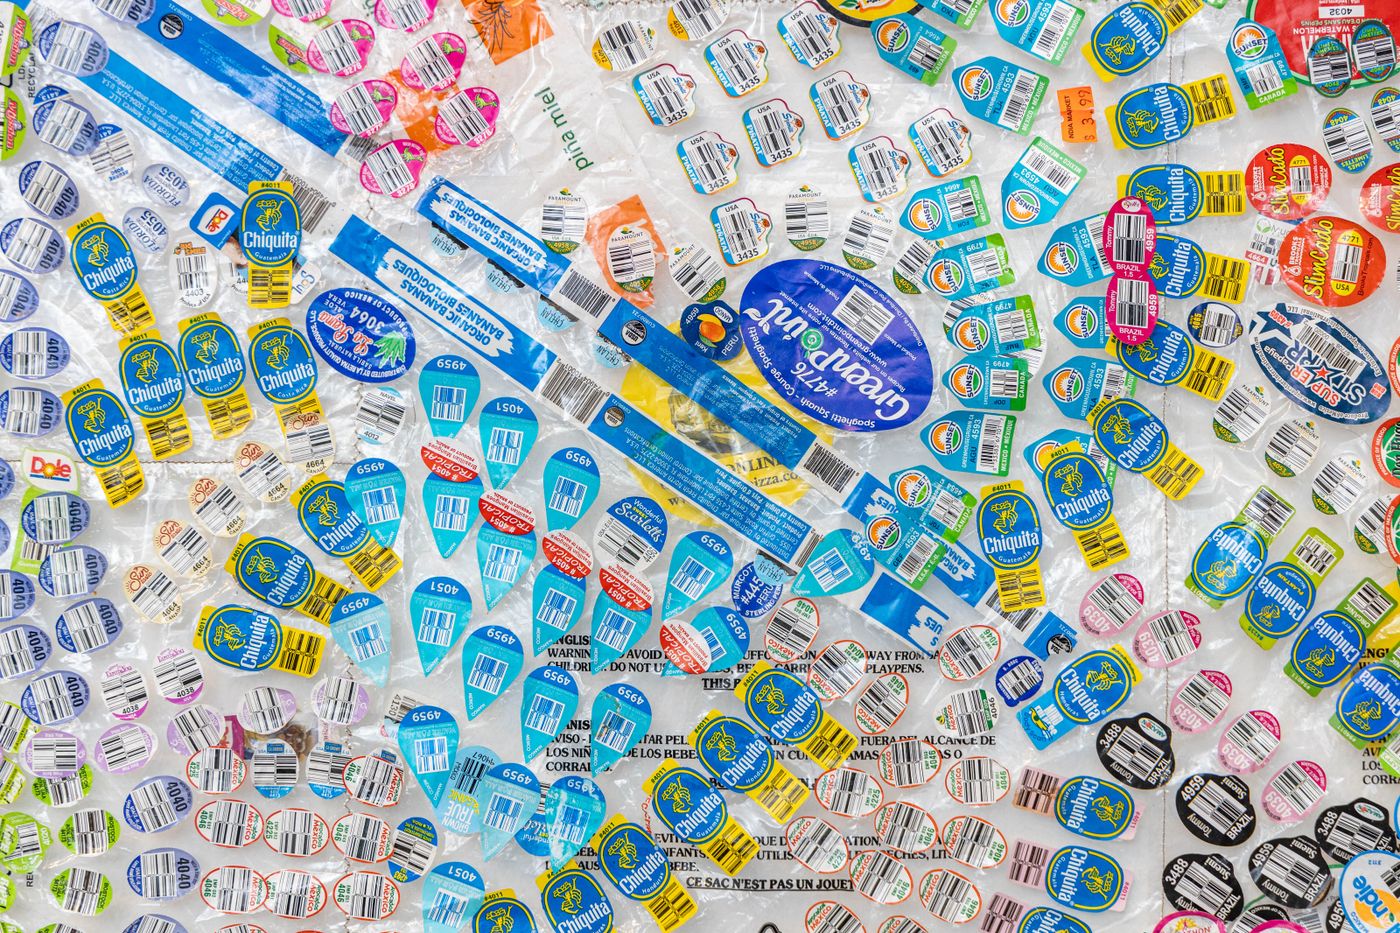 Calcomanías / Food stickers (detail), 2021. Food stickers on sewn plastic; 59 x 40 in. Photo: Meghan Olson.